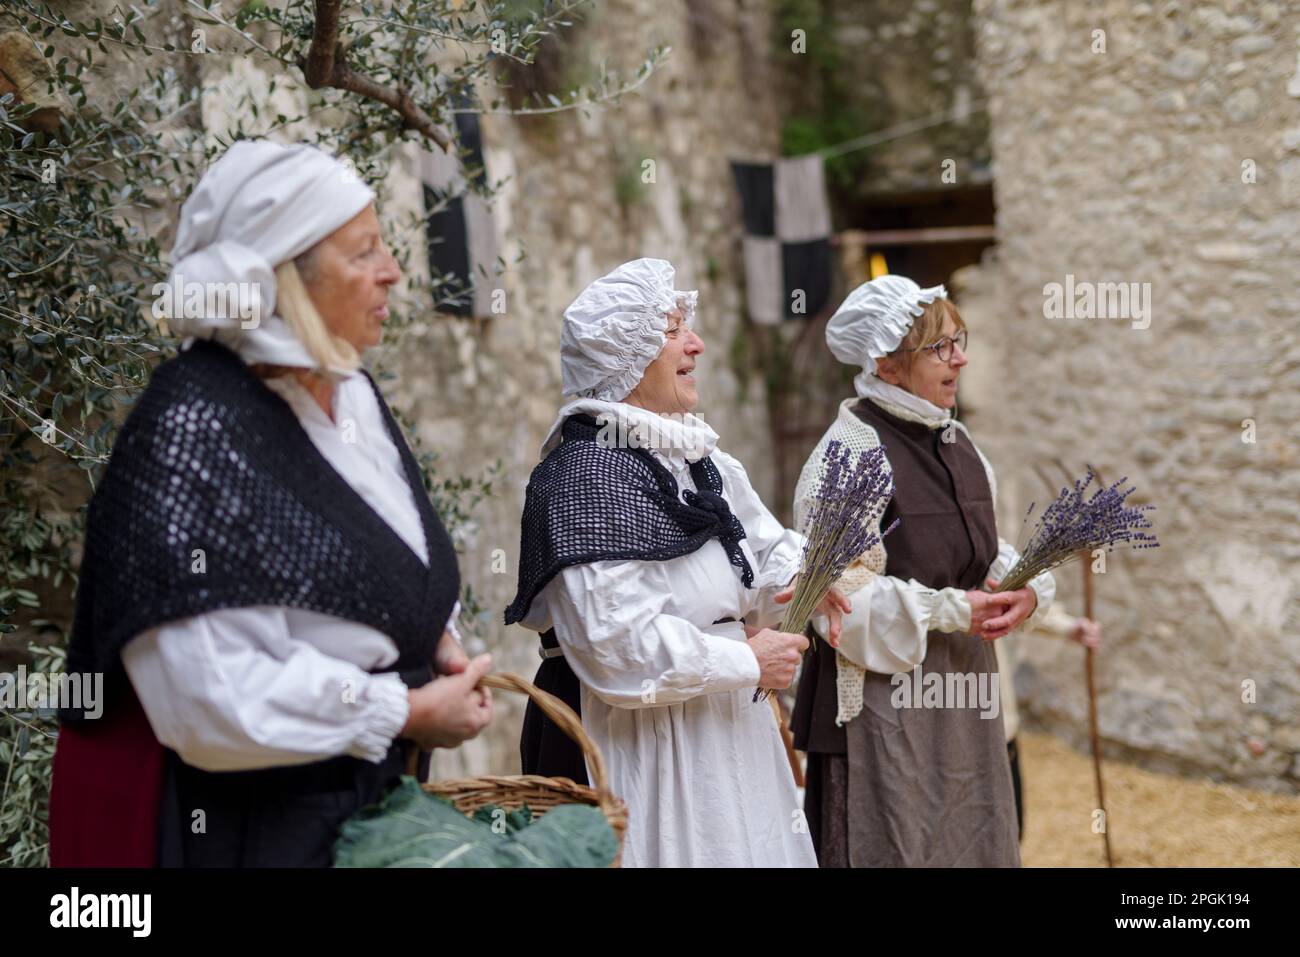 Participants of historical reenactment in the old town of Taggia, Liguria region of Italy Stock Photo